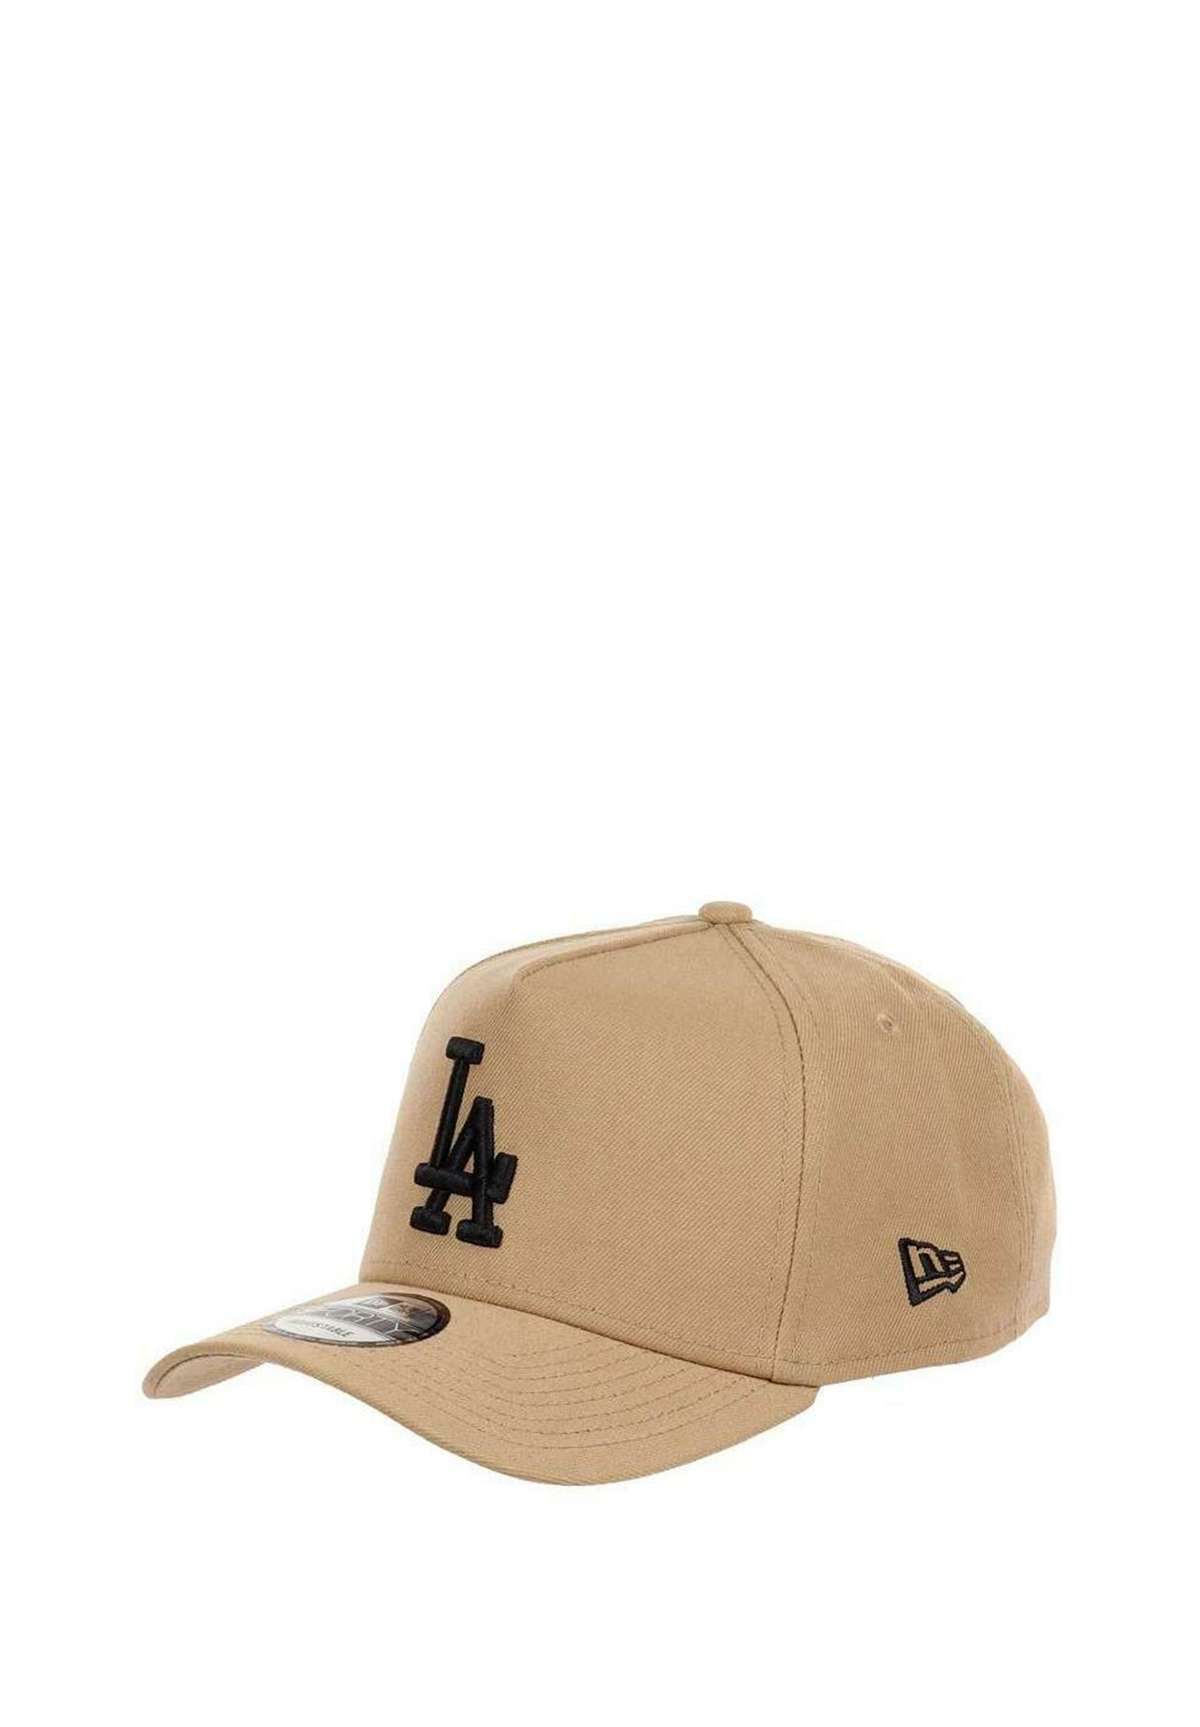 Кепка LOS ANGELES DODGERS MLB 9FORTY A-FRAME ADJUSTABLE